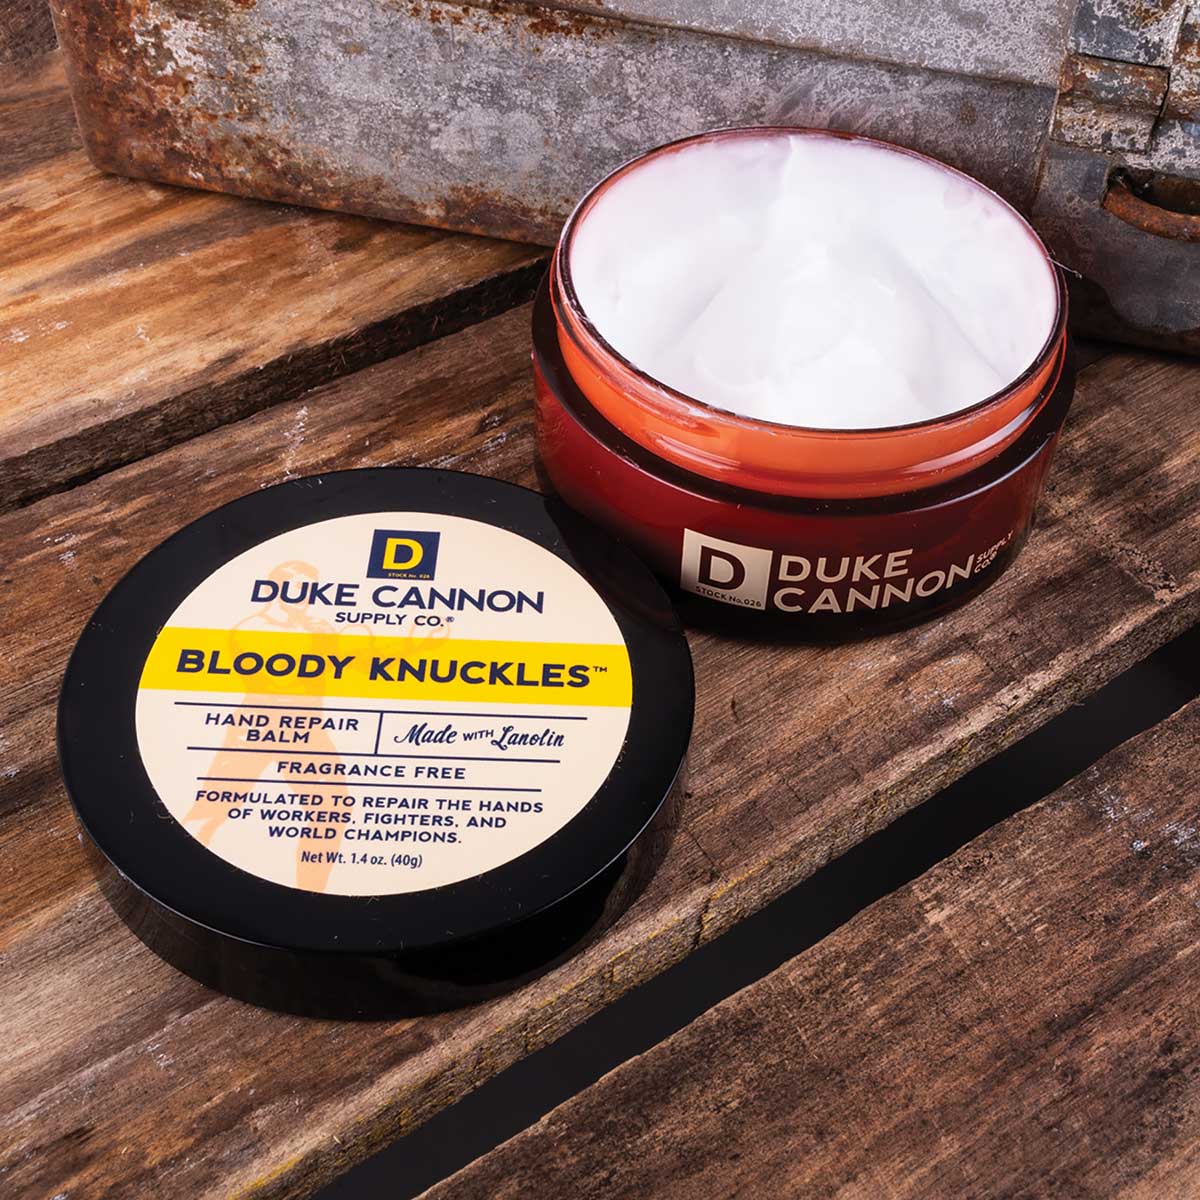 Duke Cannon Bloody Knuckles Hand Repair Balm - Travel Size - 1.4oz